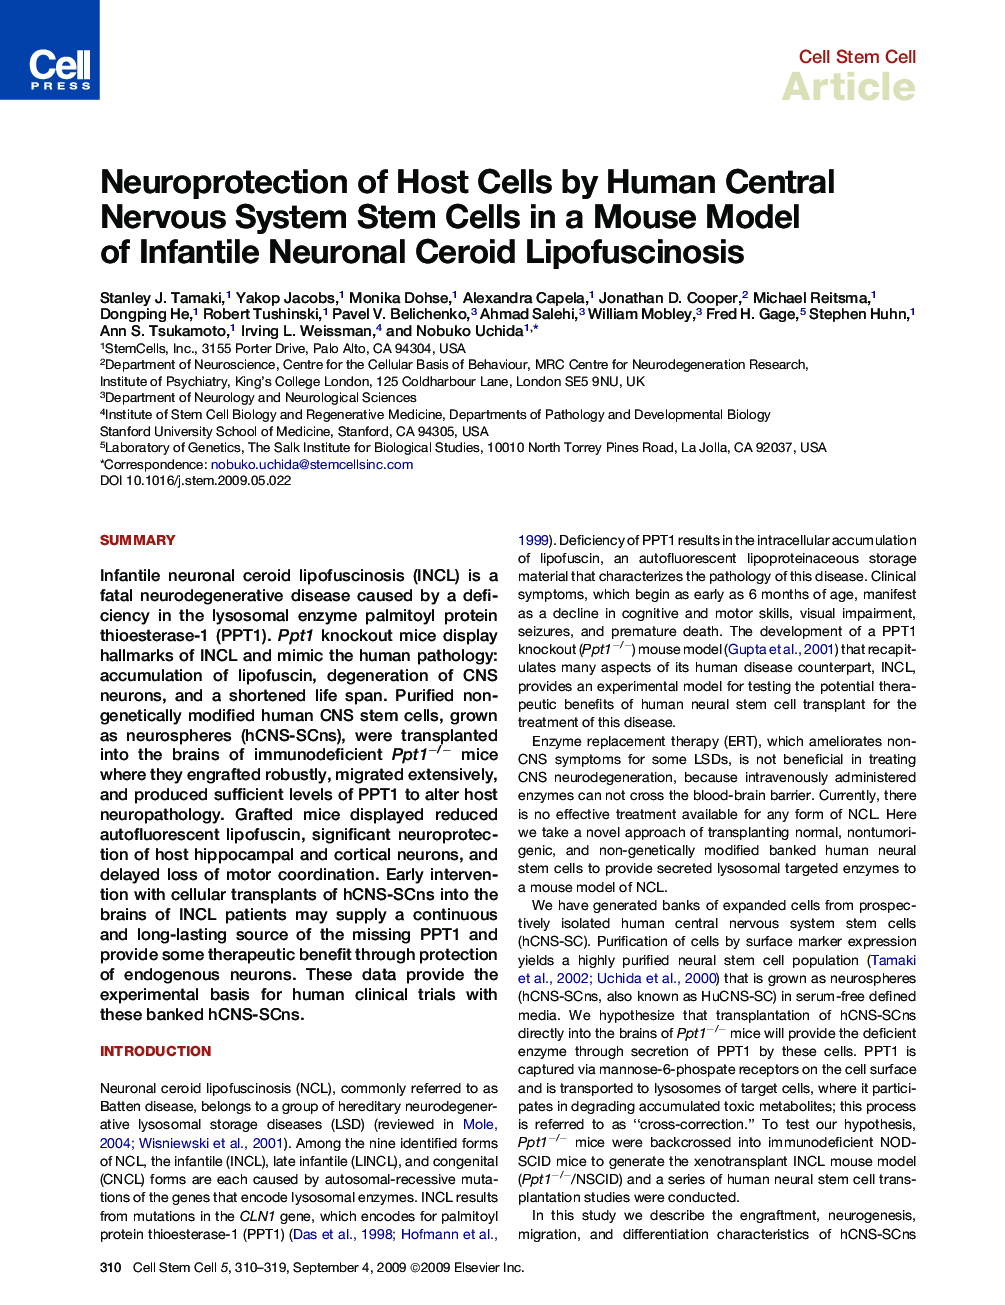 Neuroprotection of Host Cells by Human Central Nervous System Stem Cells in a Mouse Model of Infantile Neuronal Ceroid Lipofuscinosis